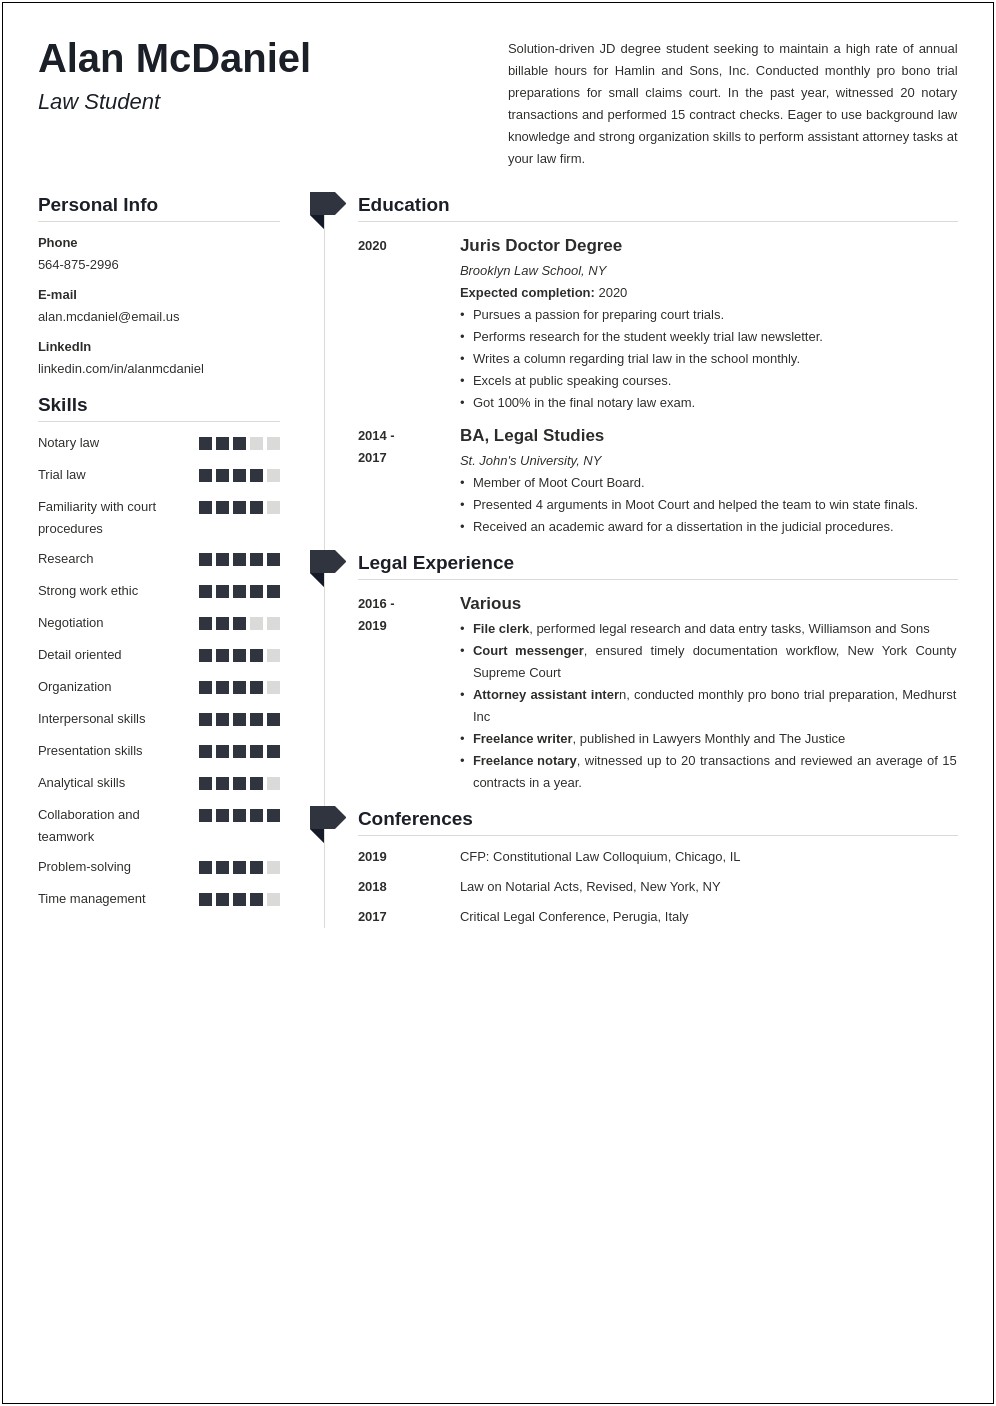 Resume Summary For Law School Applicant